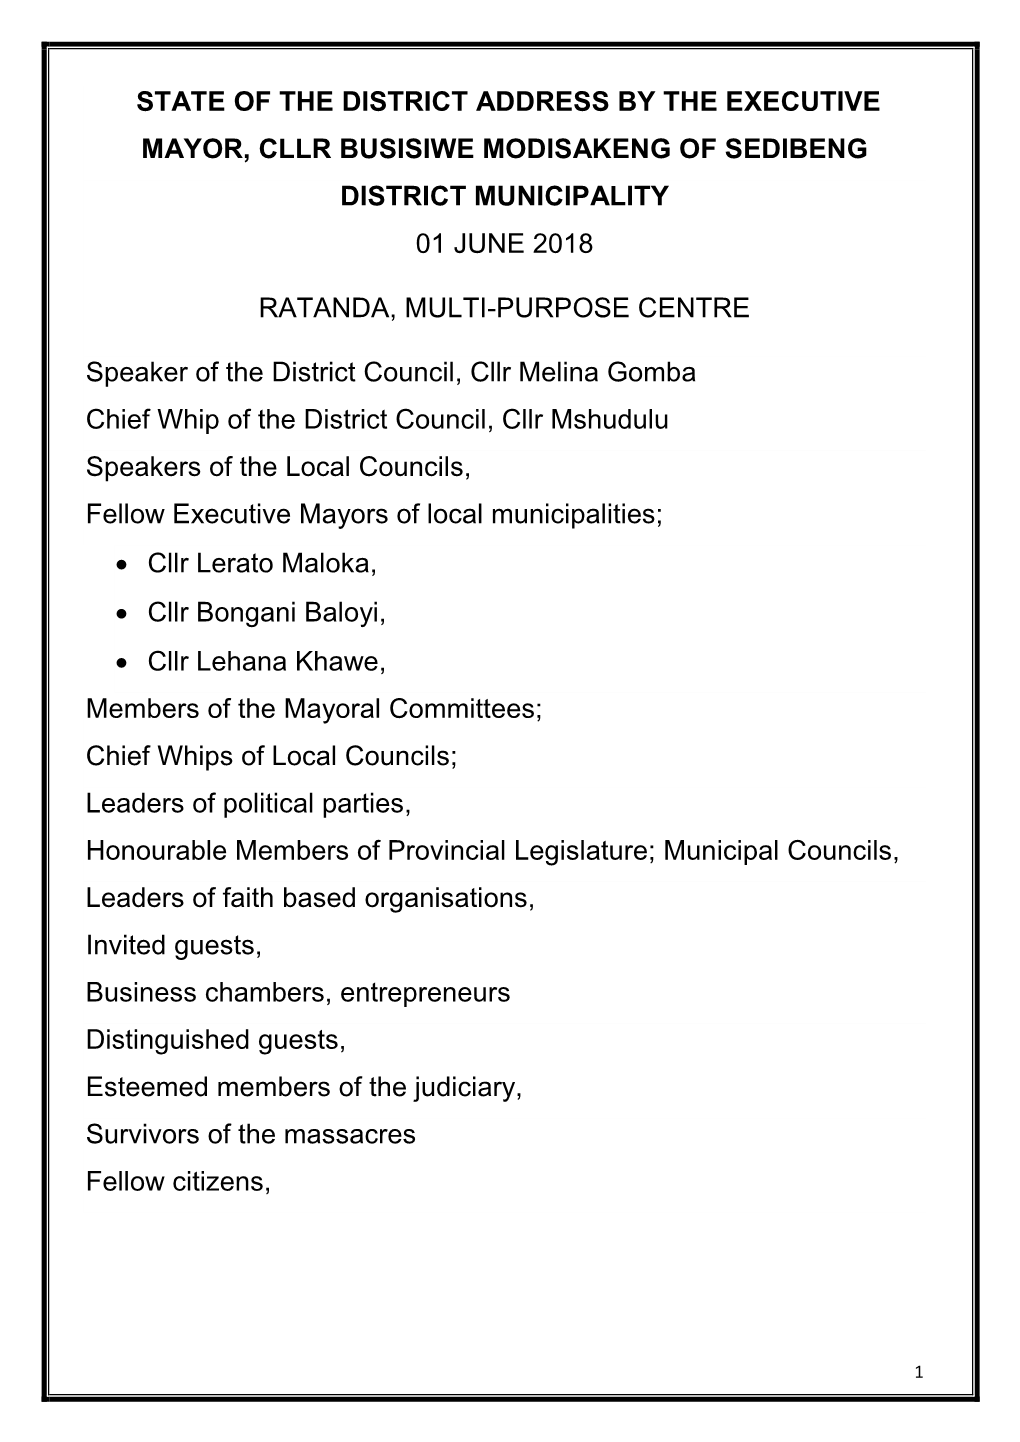 State of the District Address by the Executive Mayor, Cllr Busisiwe Modisakeng of Sedibeng District Municipality 01 June 2018